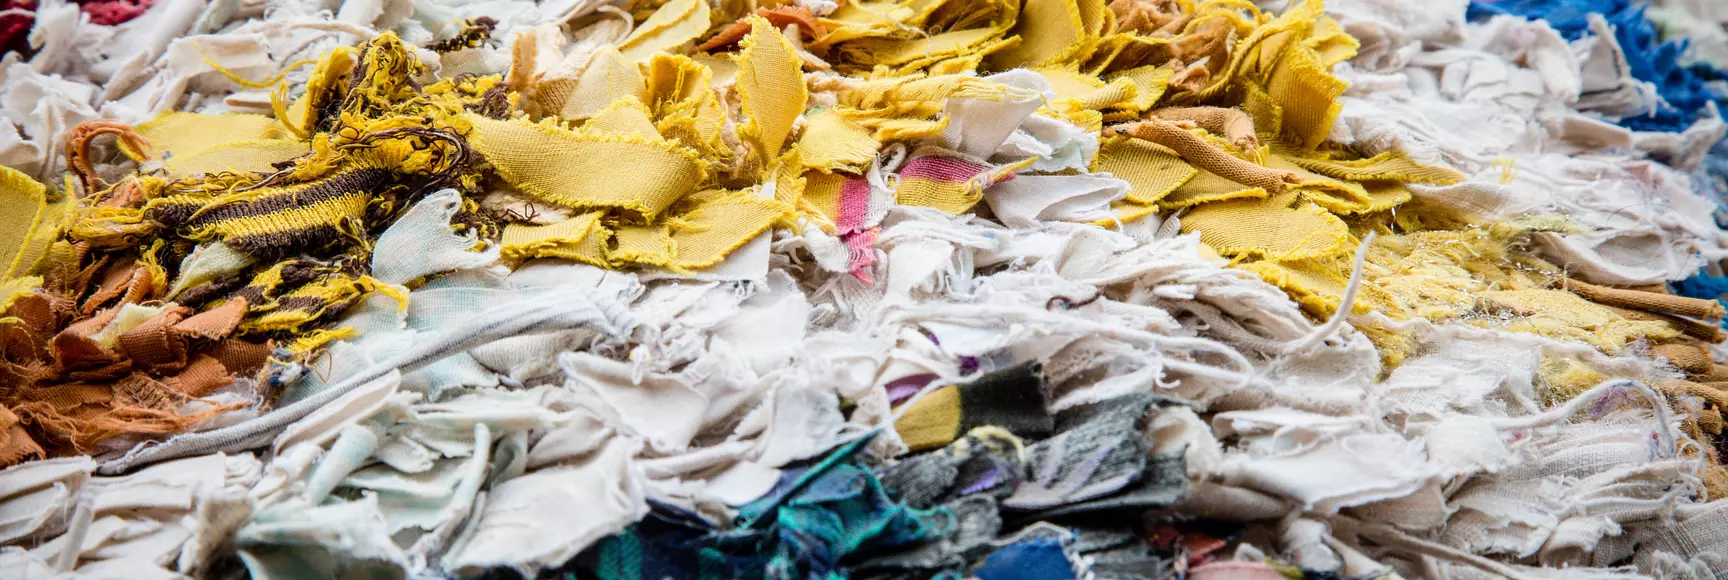 An image of textile scraps in a landfill shows how waste is a real apparel industry issue that requires innovative solutions. 